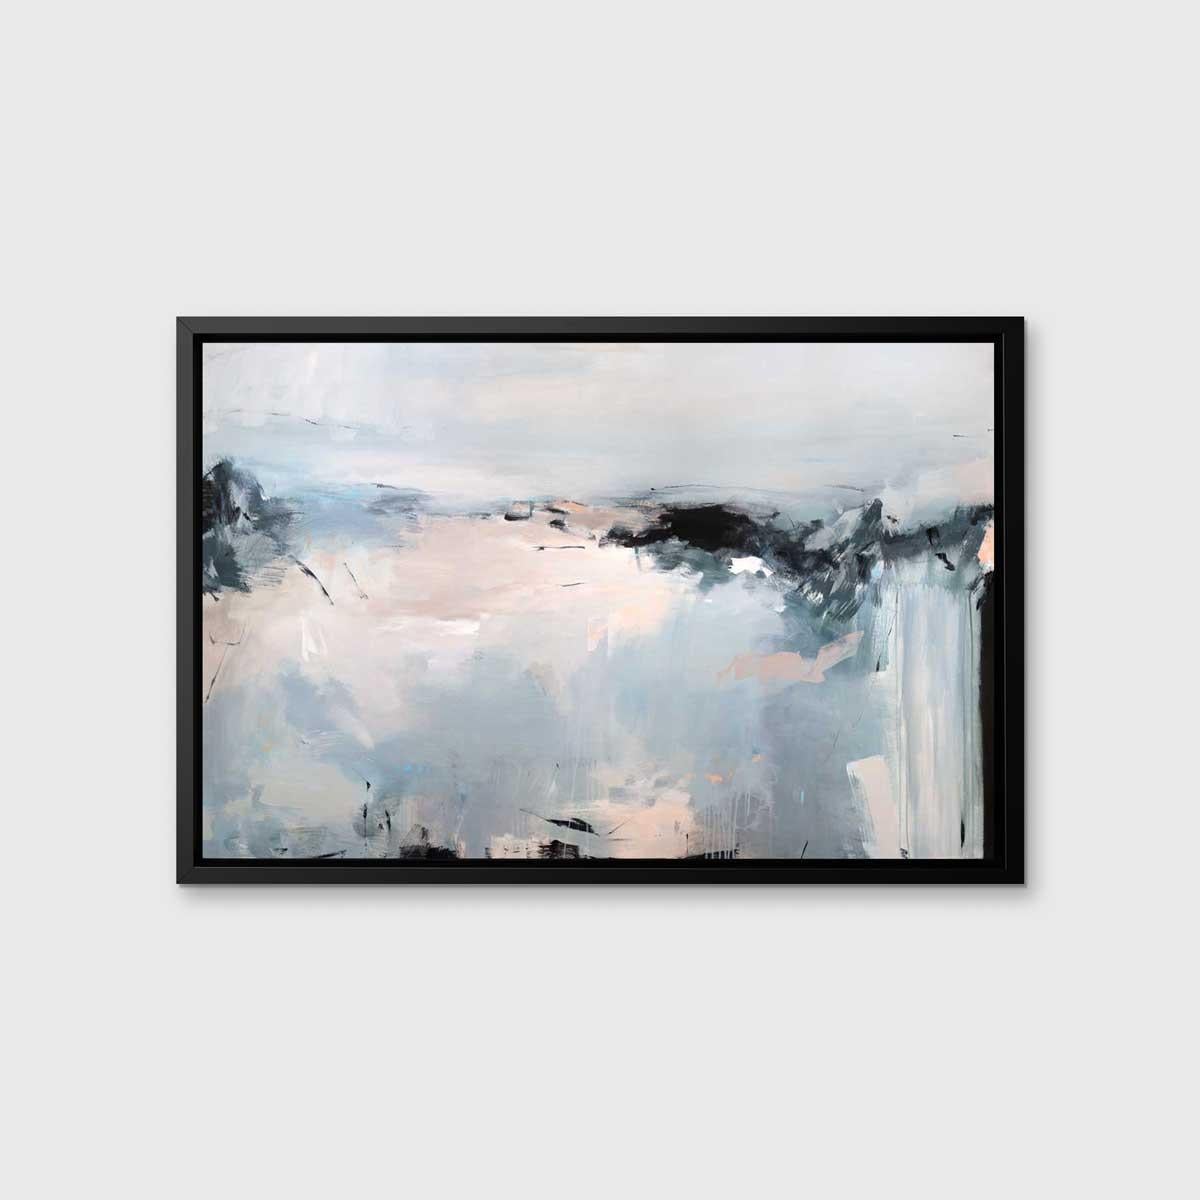 This abstract limited edition giclee print by Kelly Rossetti features a cool palette, with light blue, grey, white, charcoal black accents and contrasting pale pink added in broad, energetic strokes throughout. The piece loosely follows a landscape